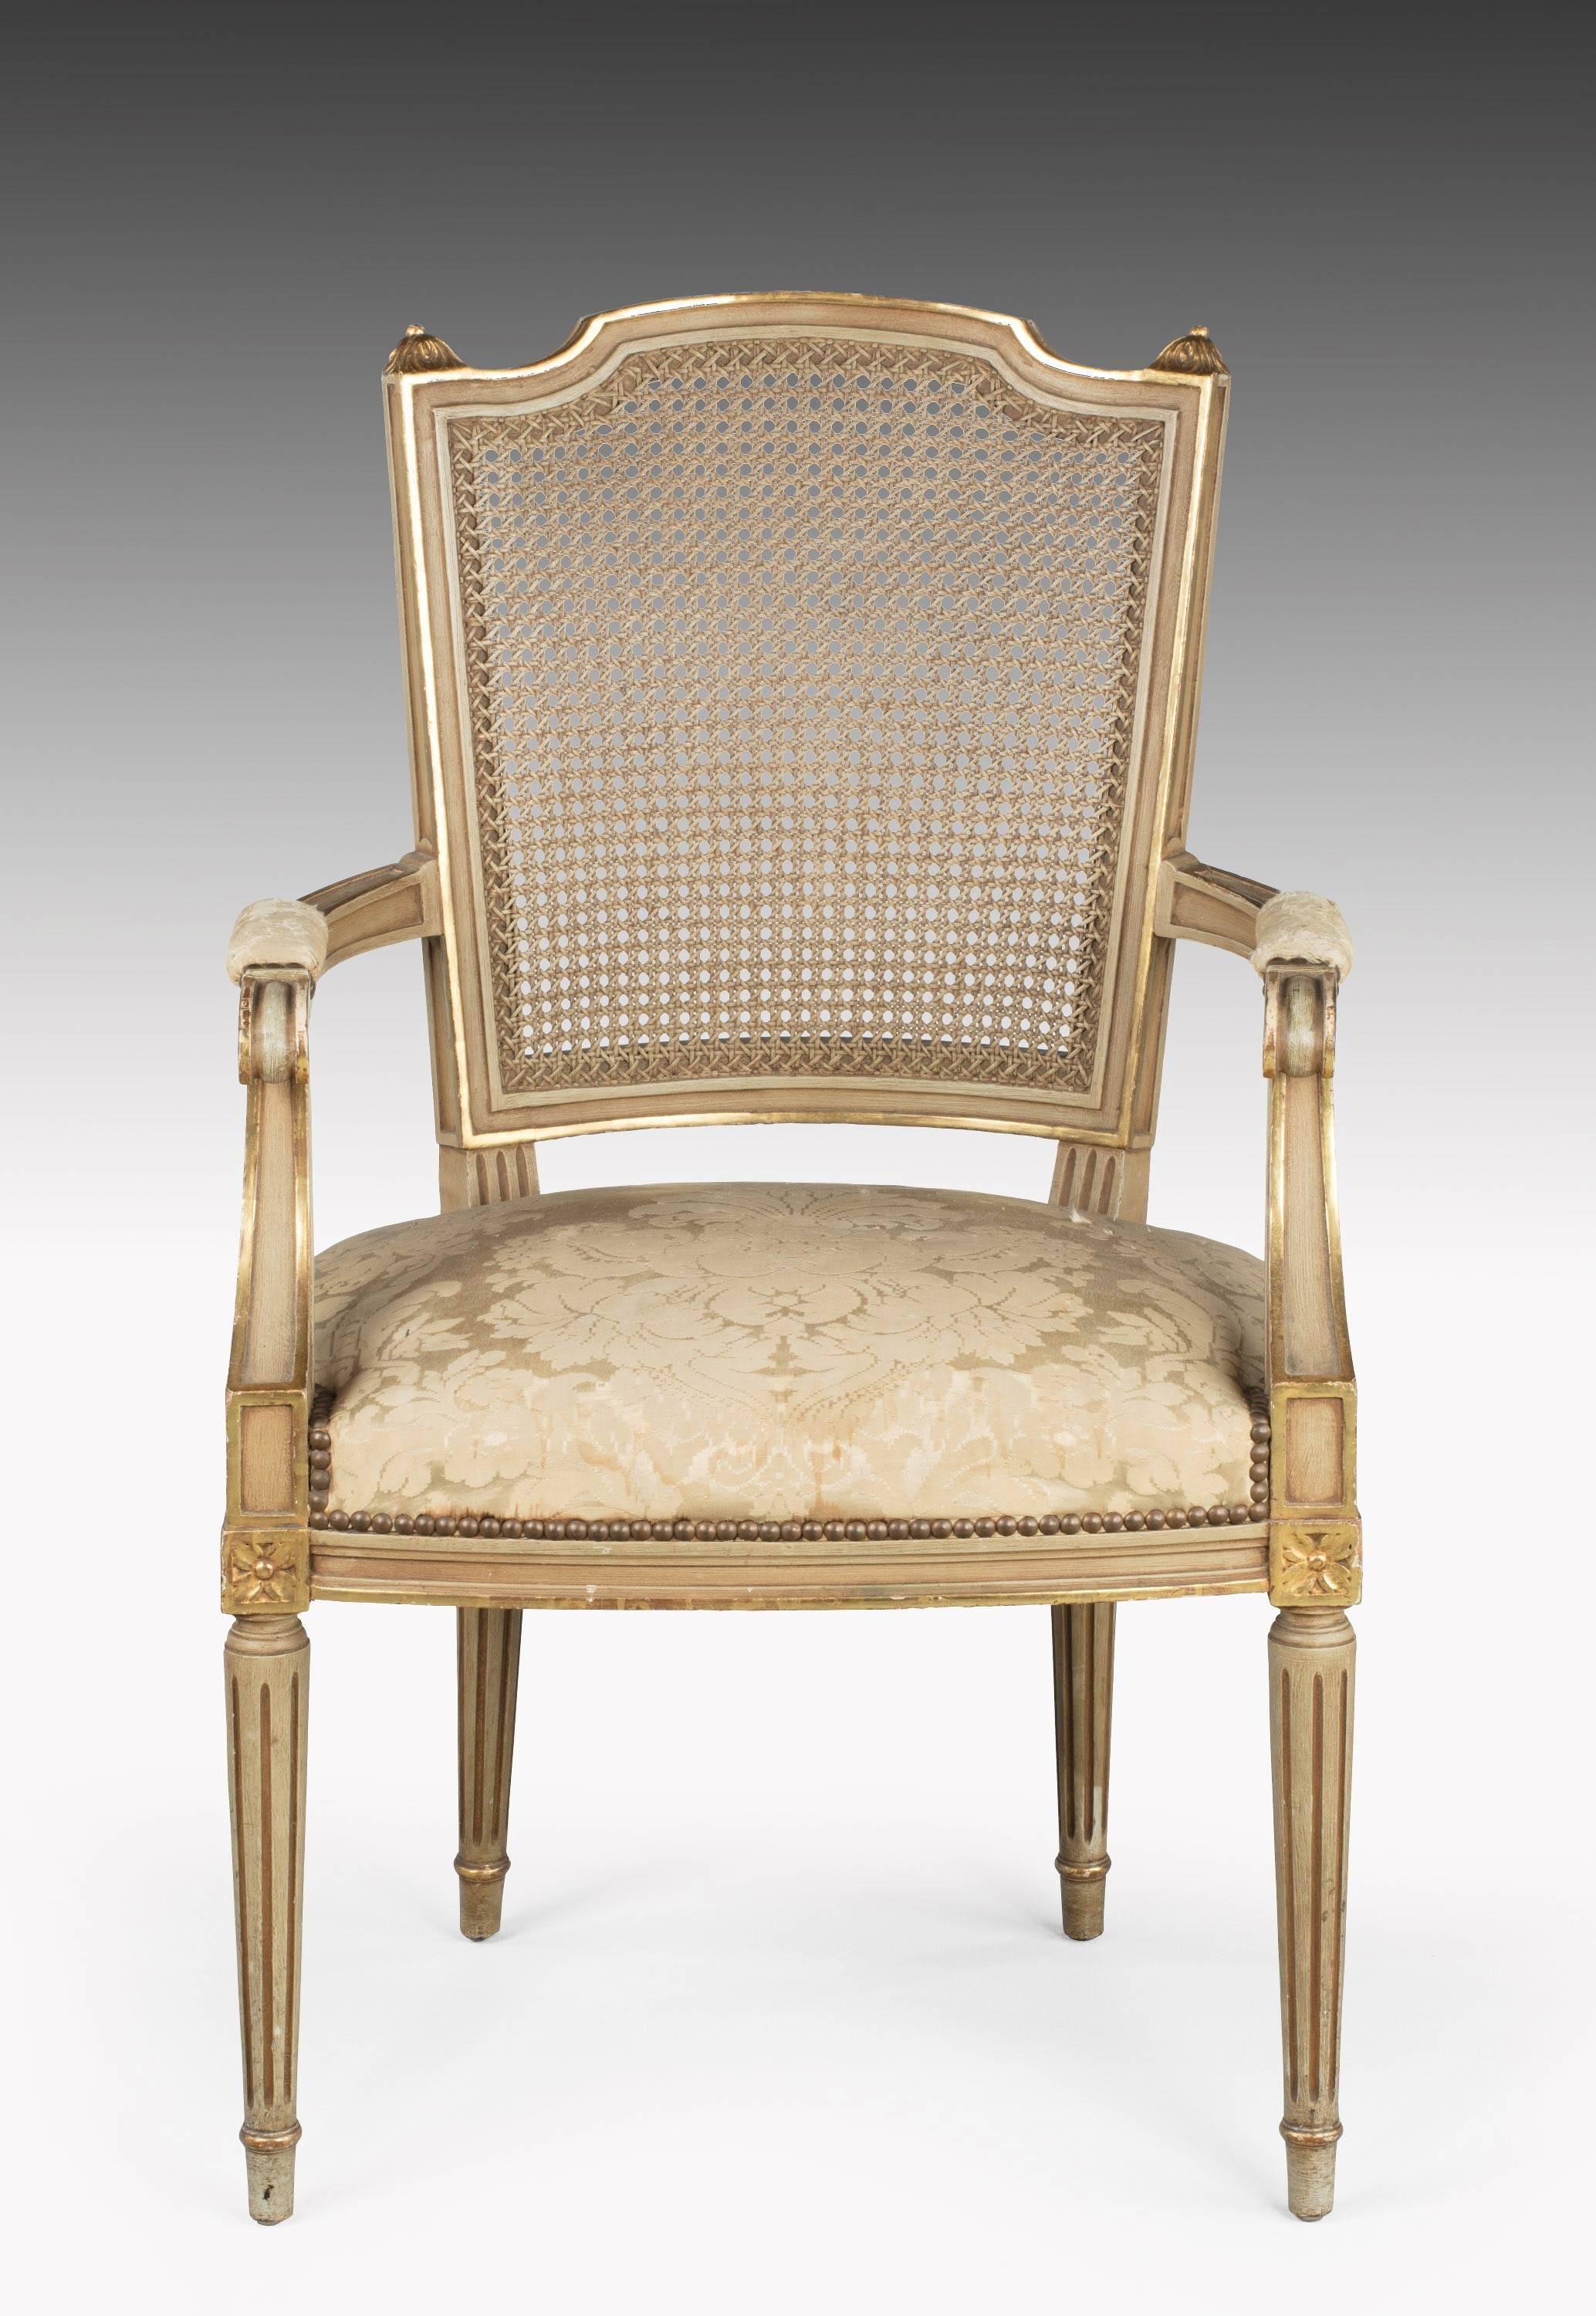 A good pair of early 20th century French painted and parcel gilt elbow chairs. The ivory ground somewhat tired now but still in very good condition and the gilding original. 

Measures: Seat height 18 inches.